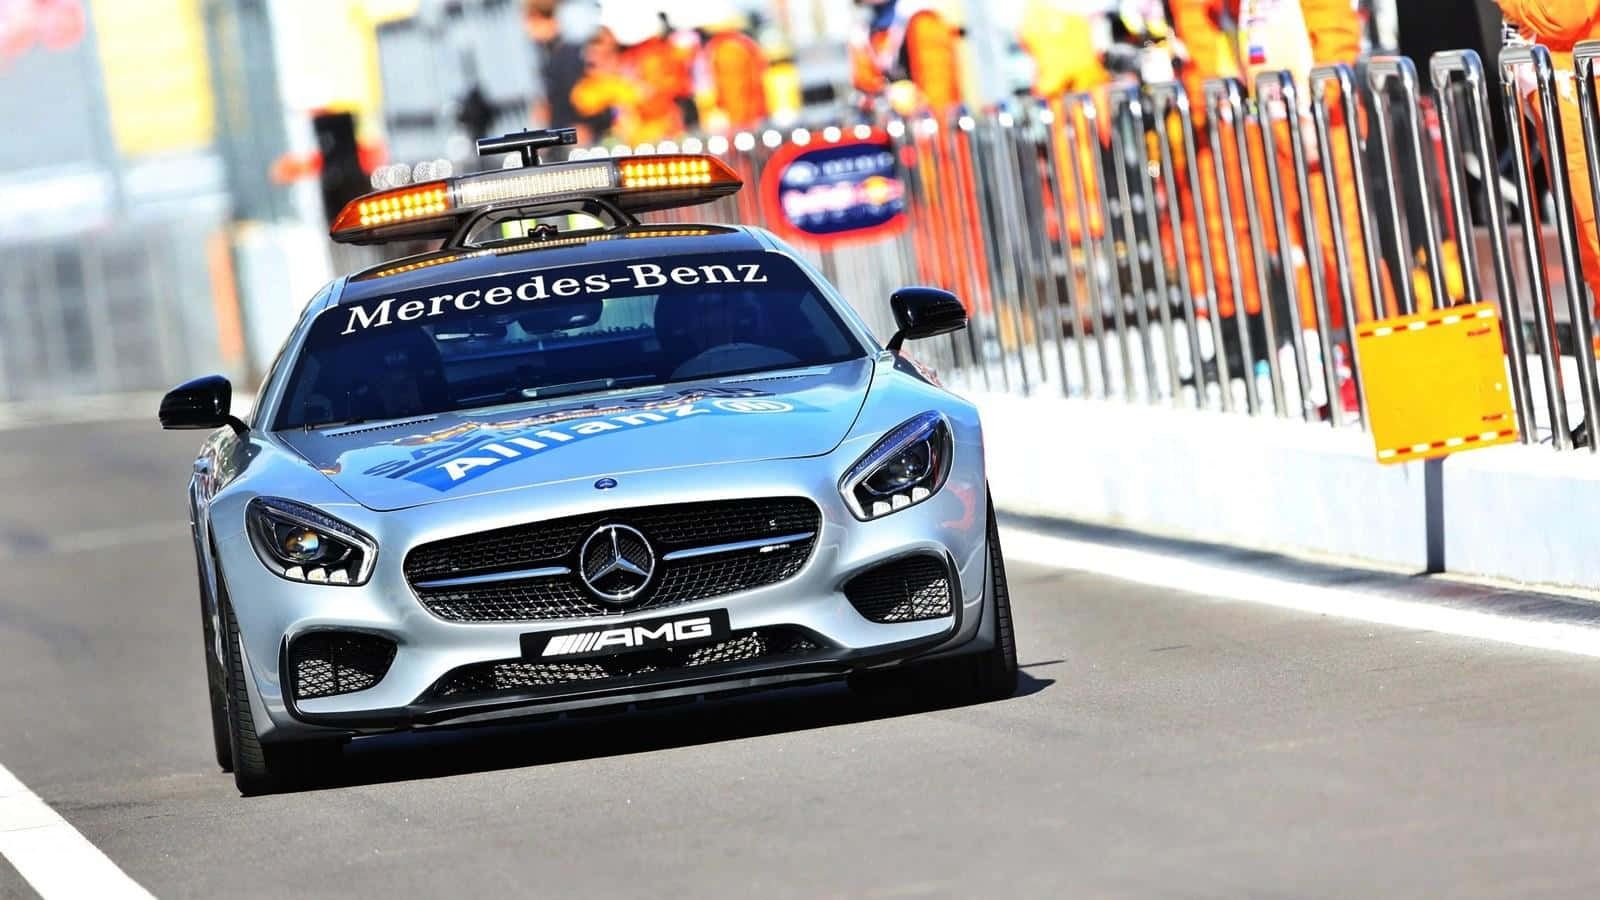 A safety car leading the race on a track Wallpaper